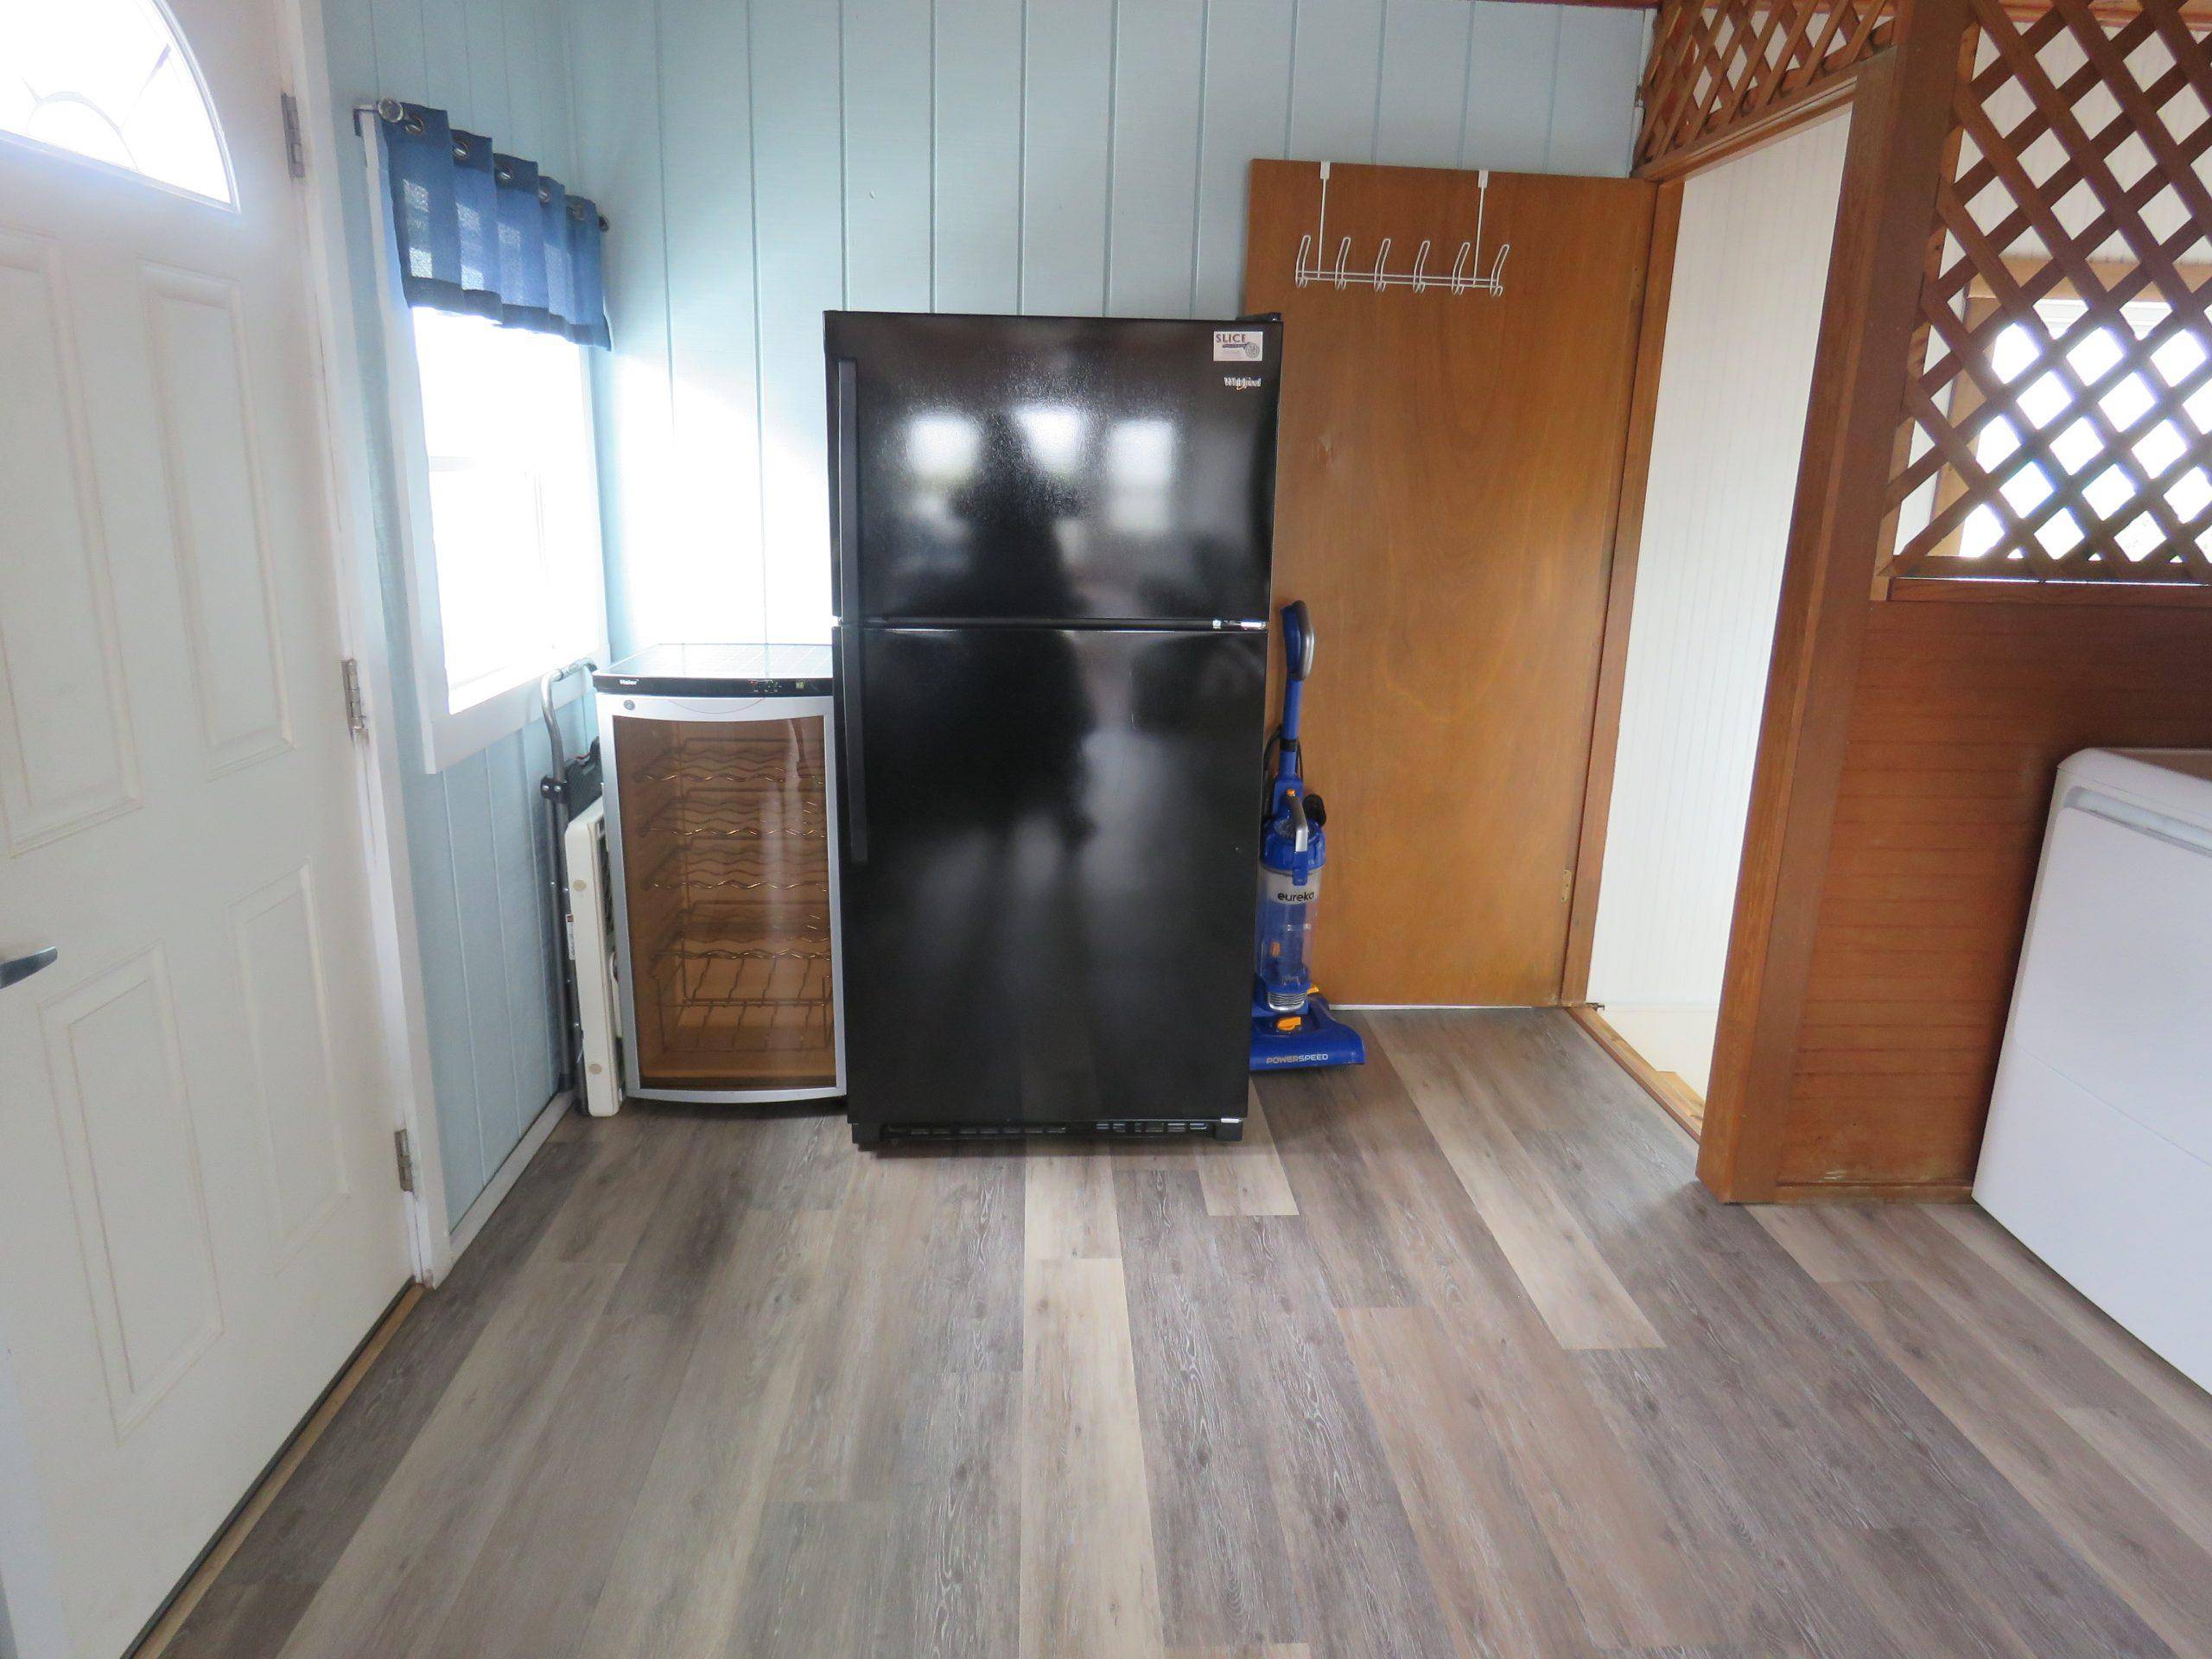 Wine Cooler and Second Refrigerator